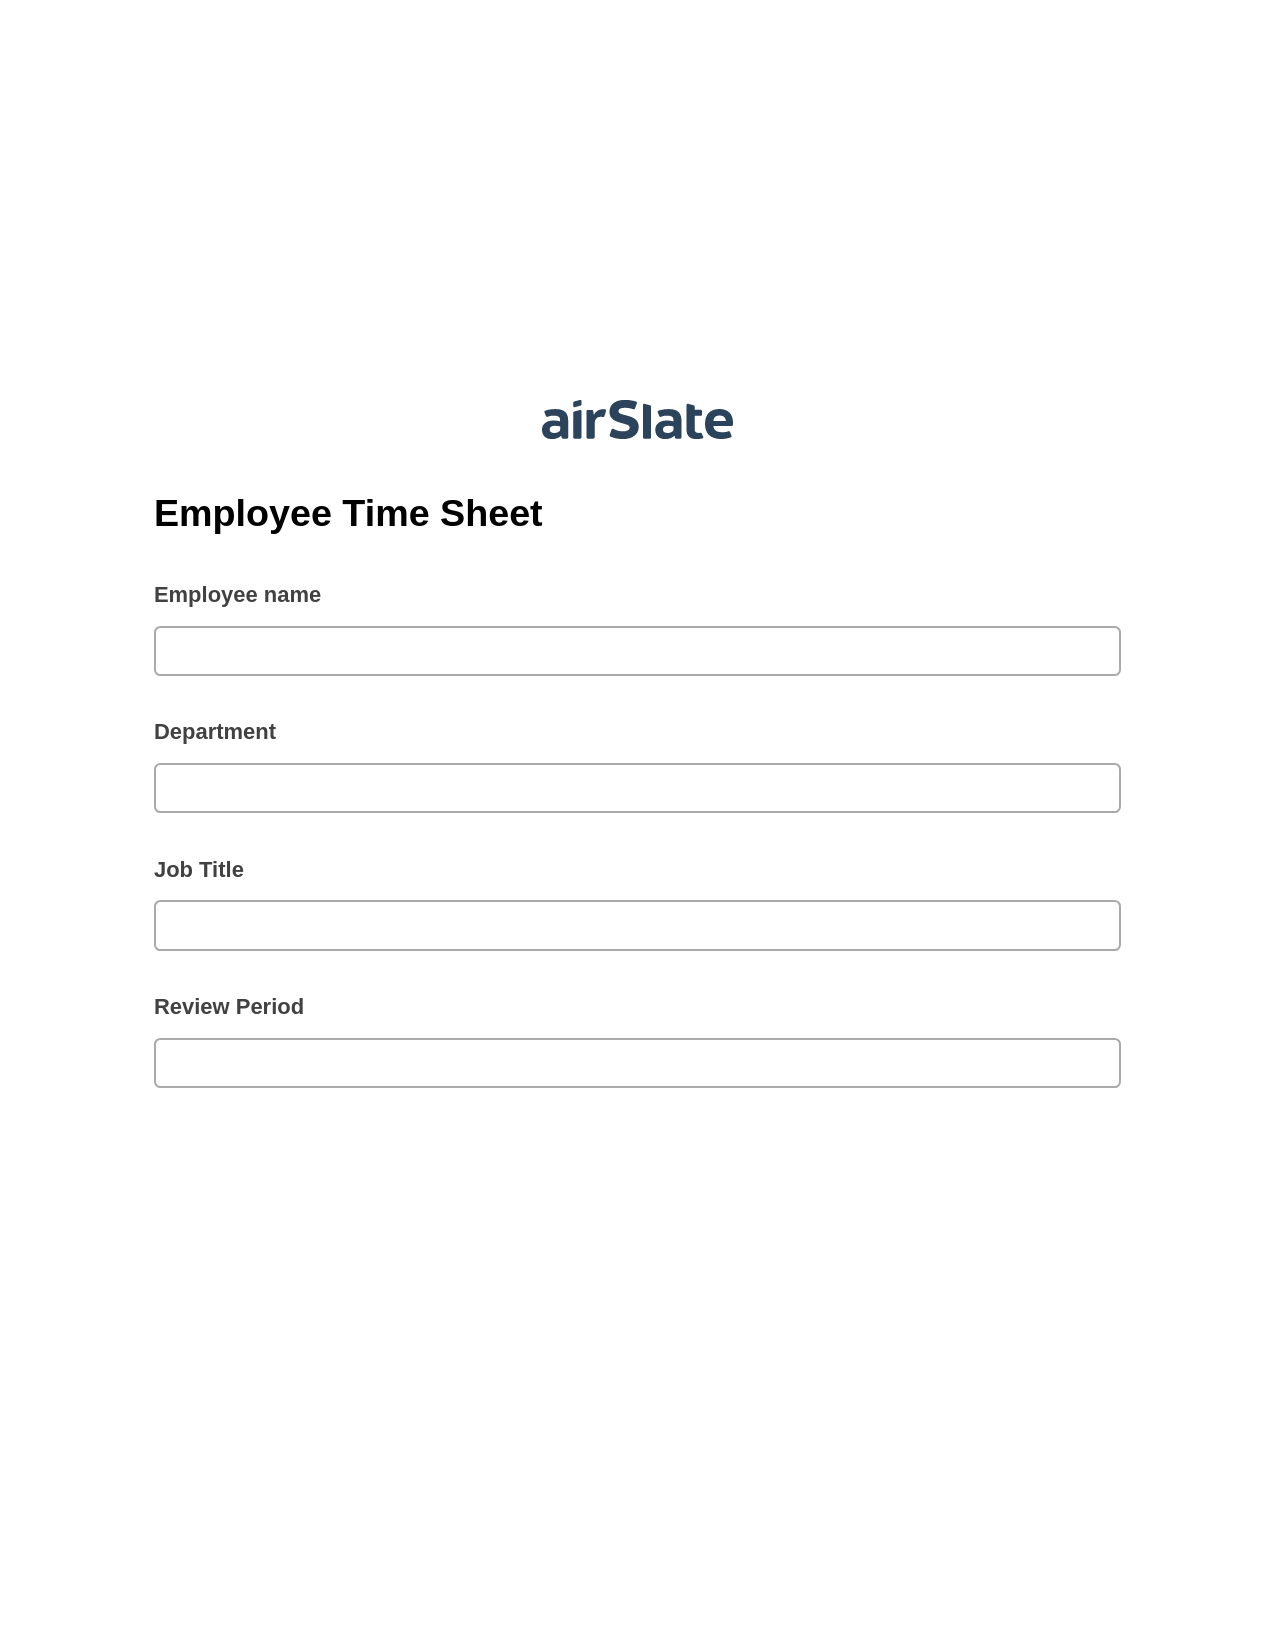 Multirole Employee Time Sheet Prefill from NetSuite records, Update Audit Trail Bot, Post-finish Document Bot